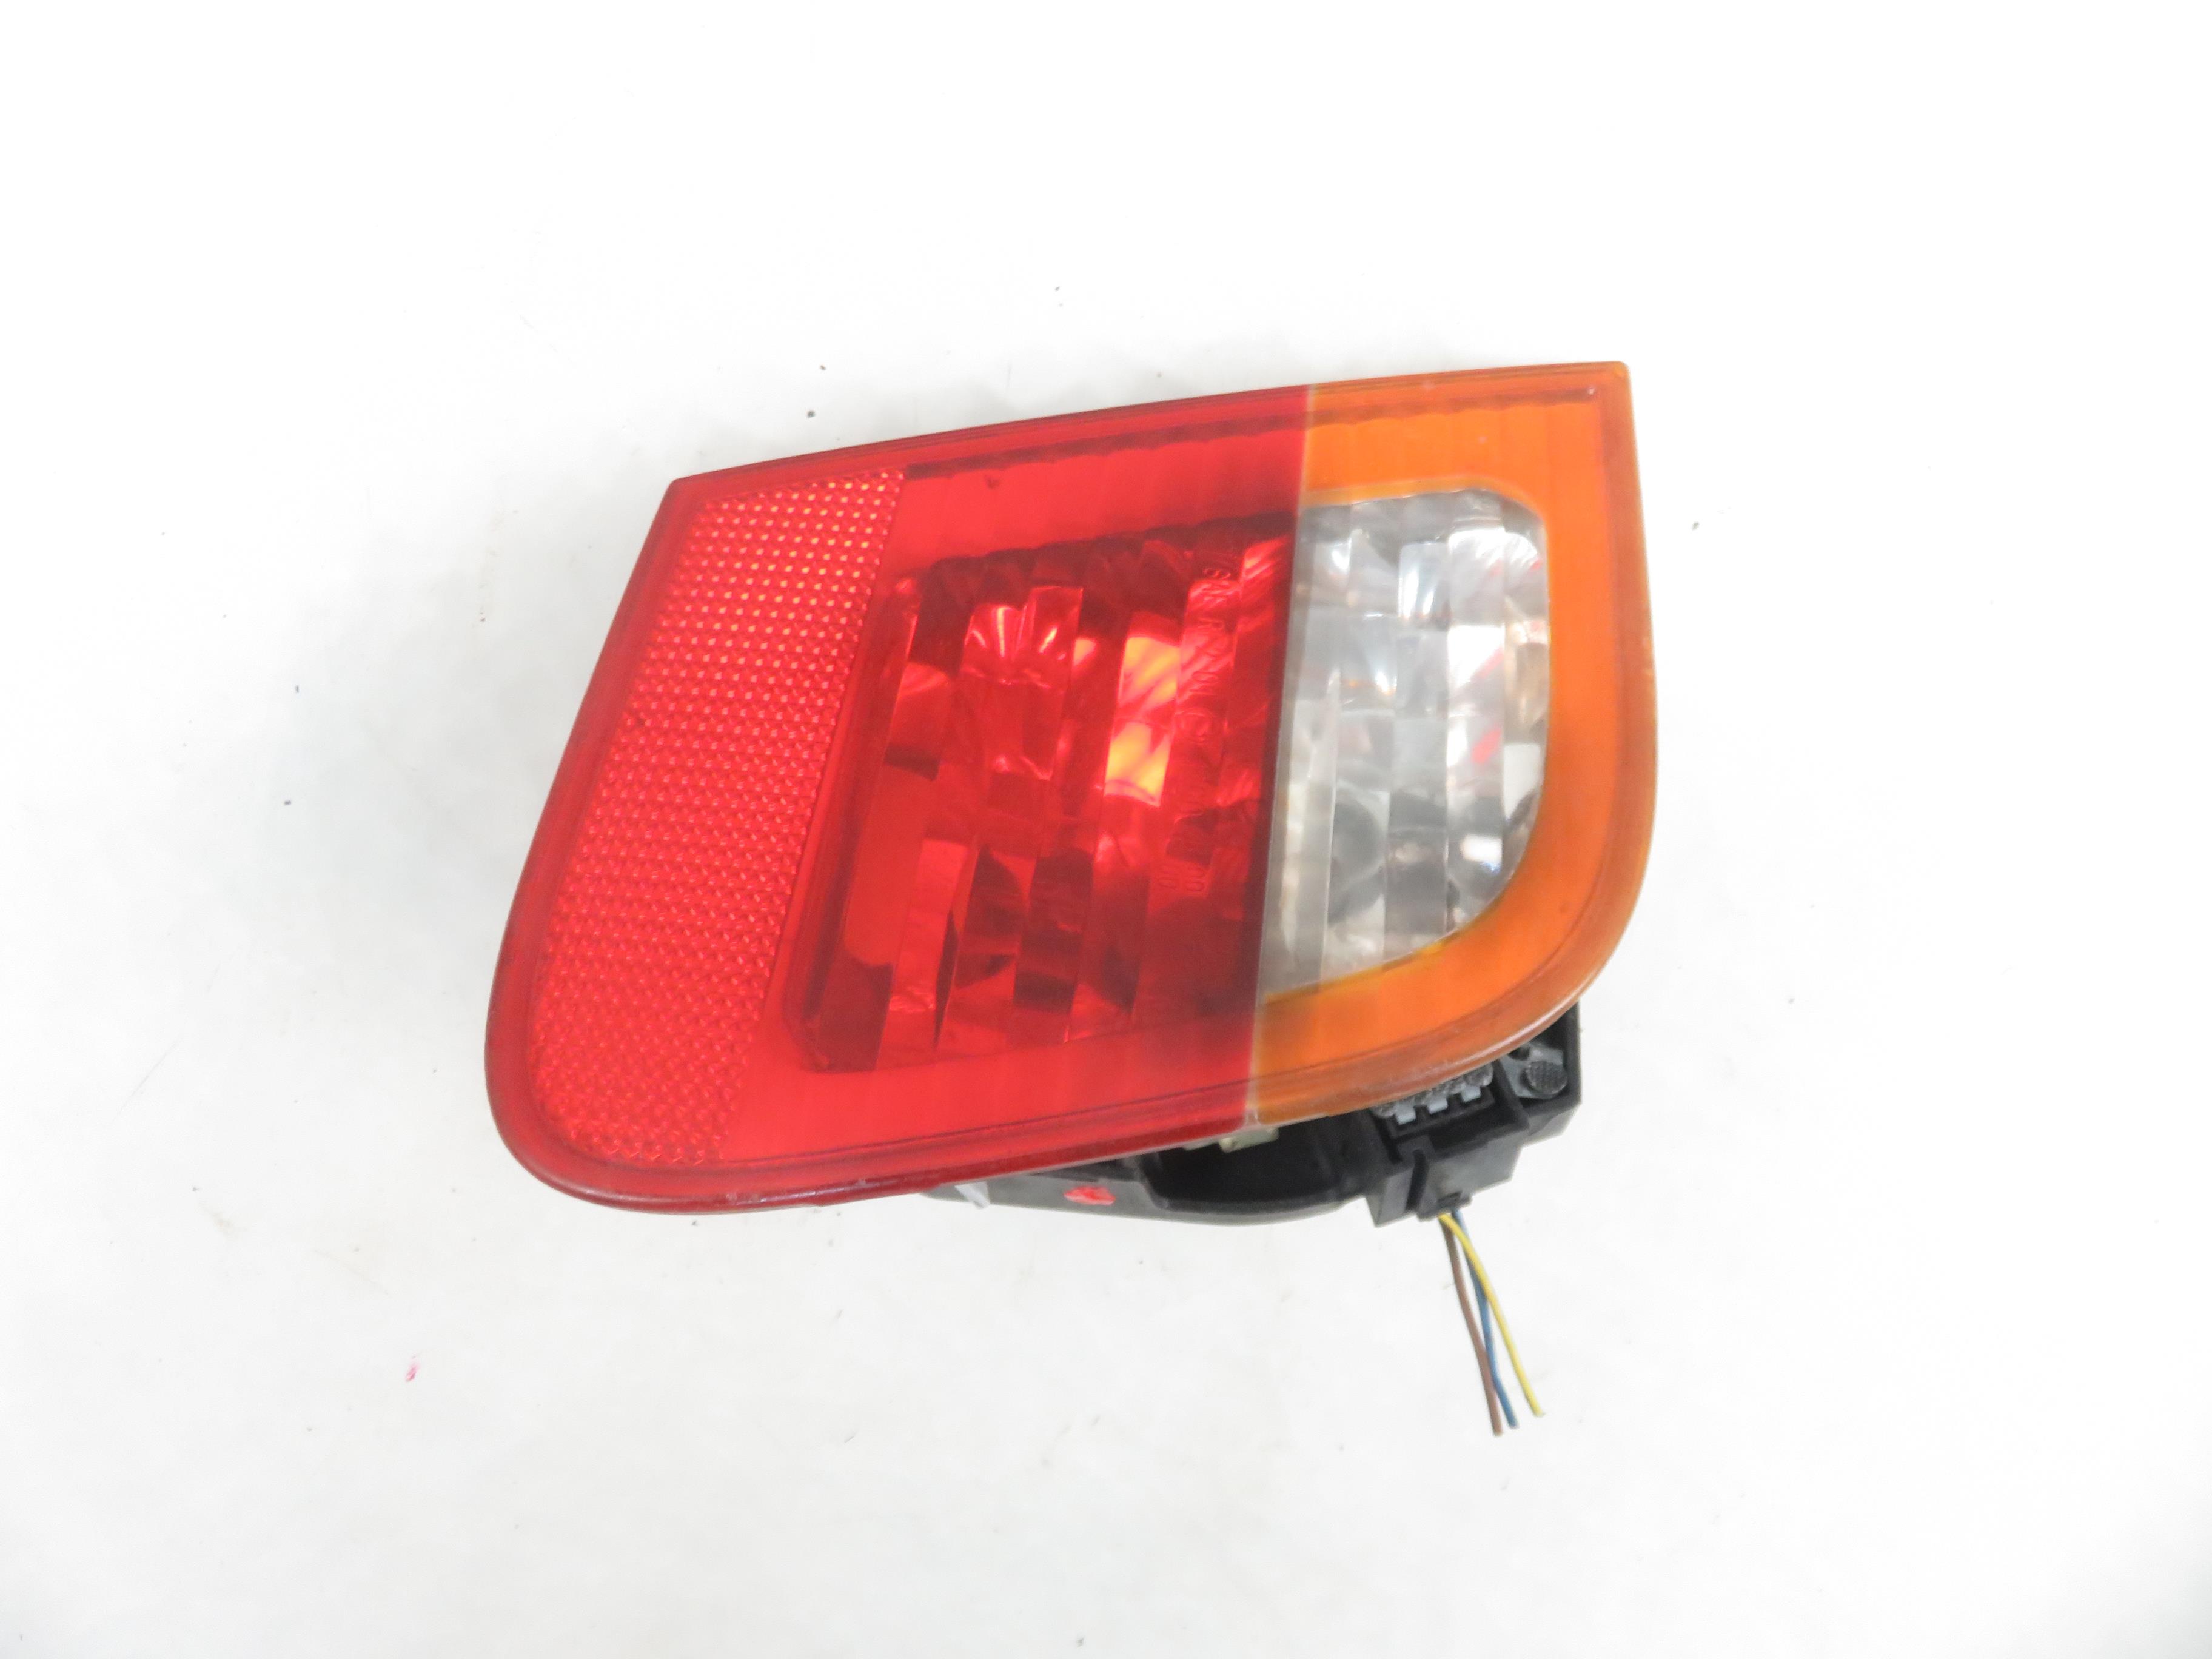 BMW 3 Series E46 (1997-2006) Rear Left Taillight 6907945, 6907937 23129843